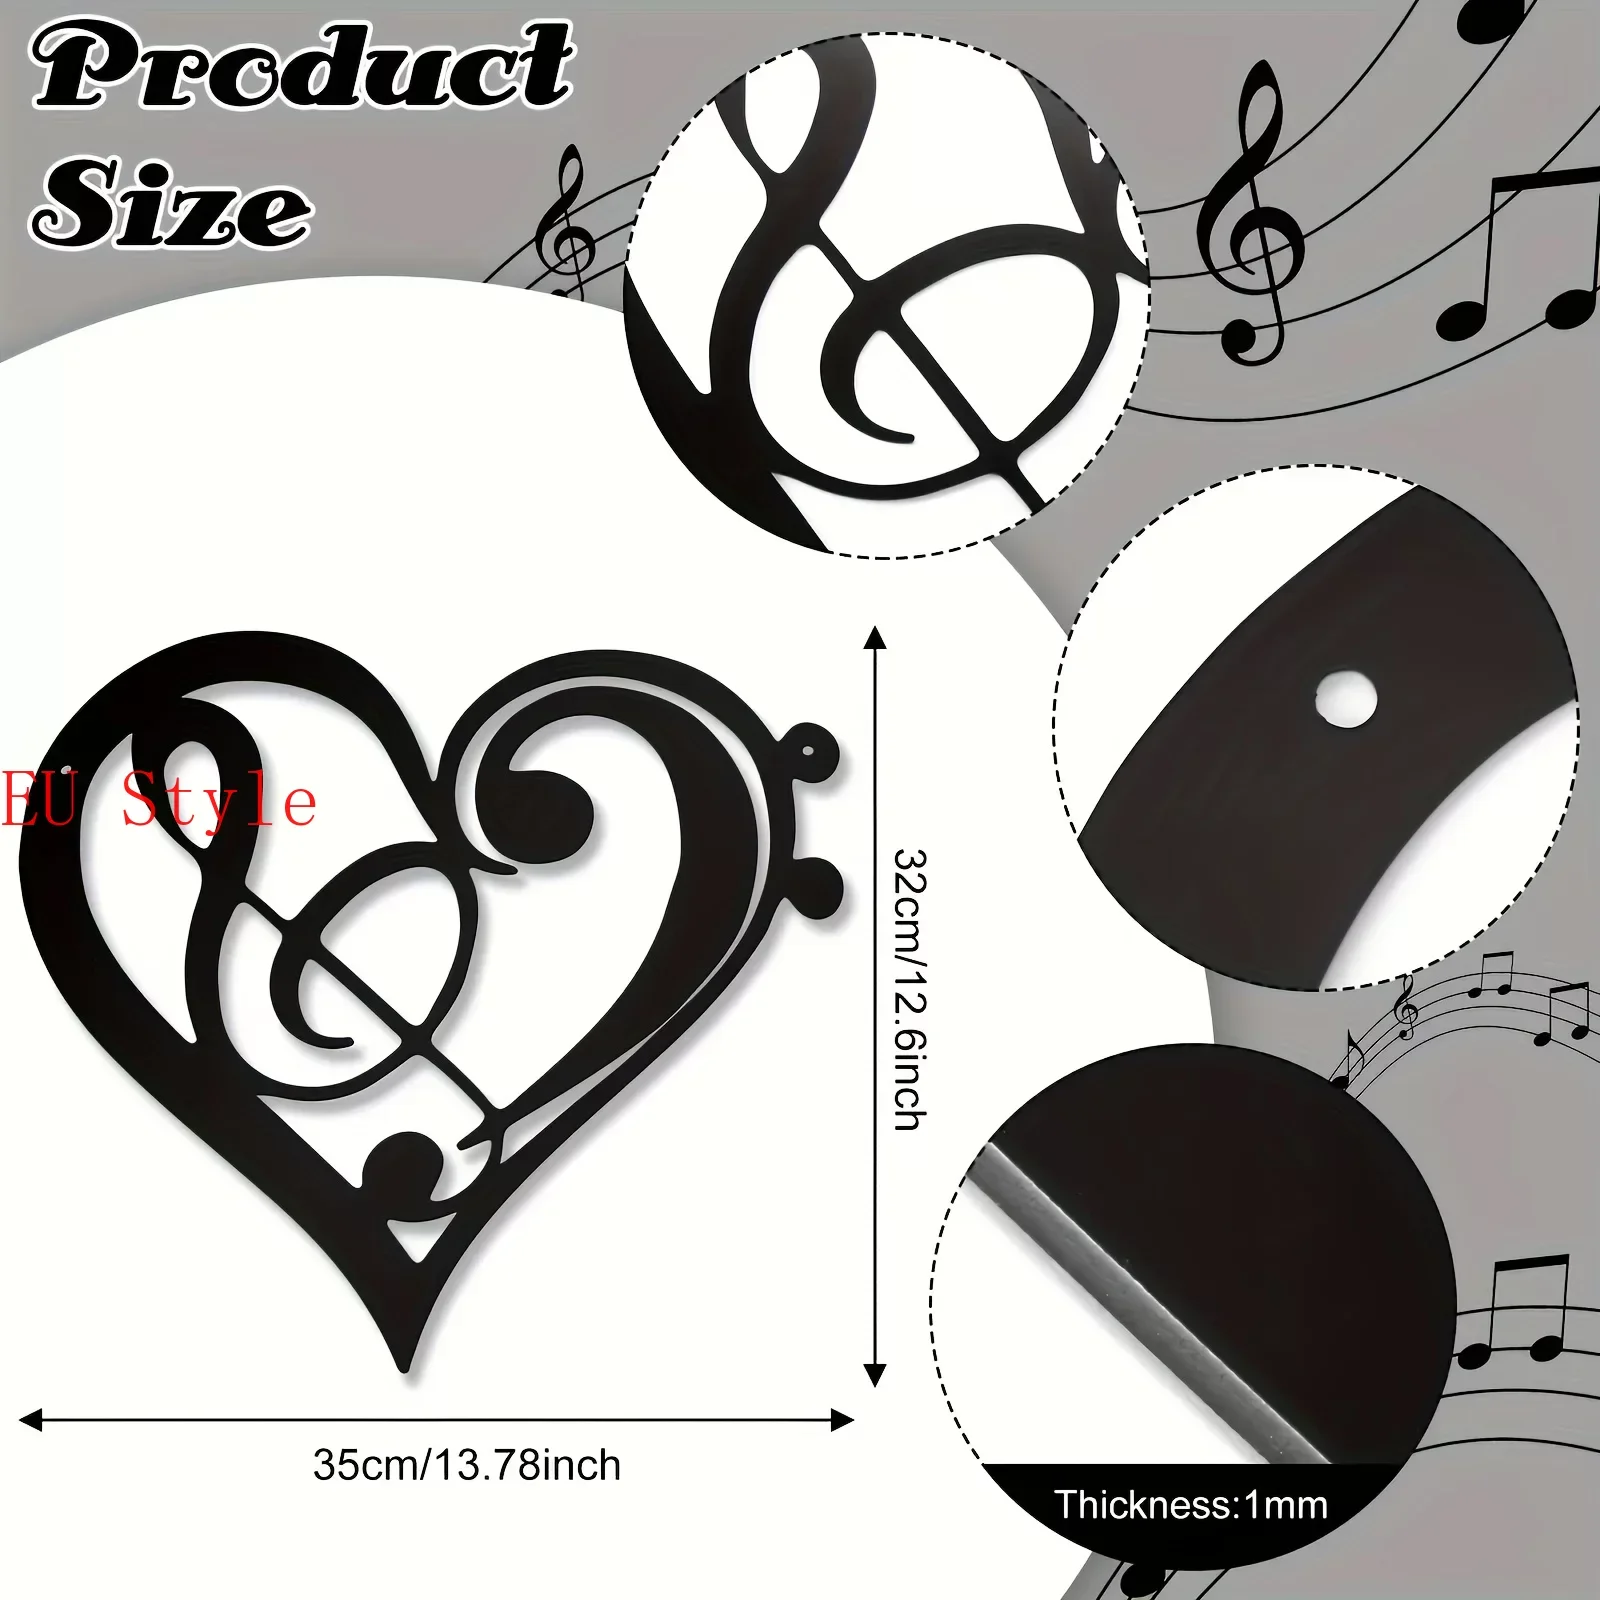 

Heart Metal Music Home Decor Musical Notes Metal Wall Art Vintage Music Theme Note Wall Hanging Sign Music Room Wall Sticker Out